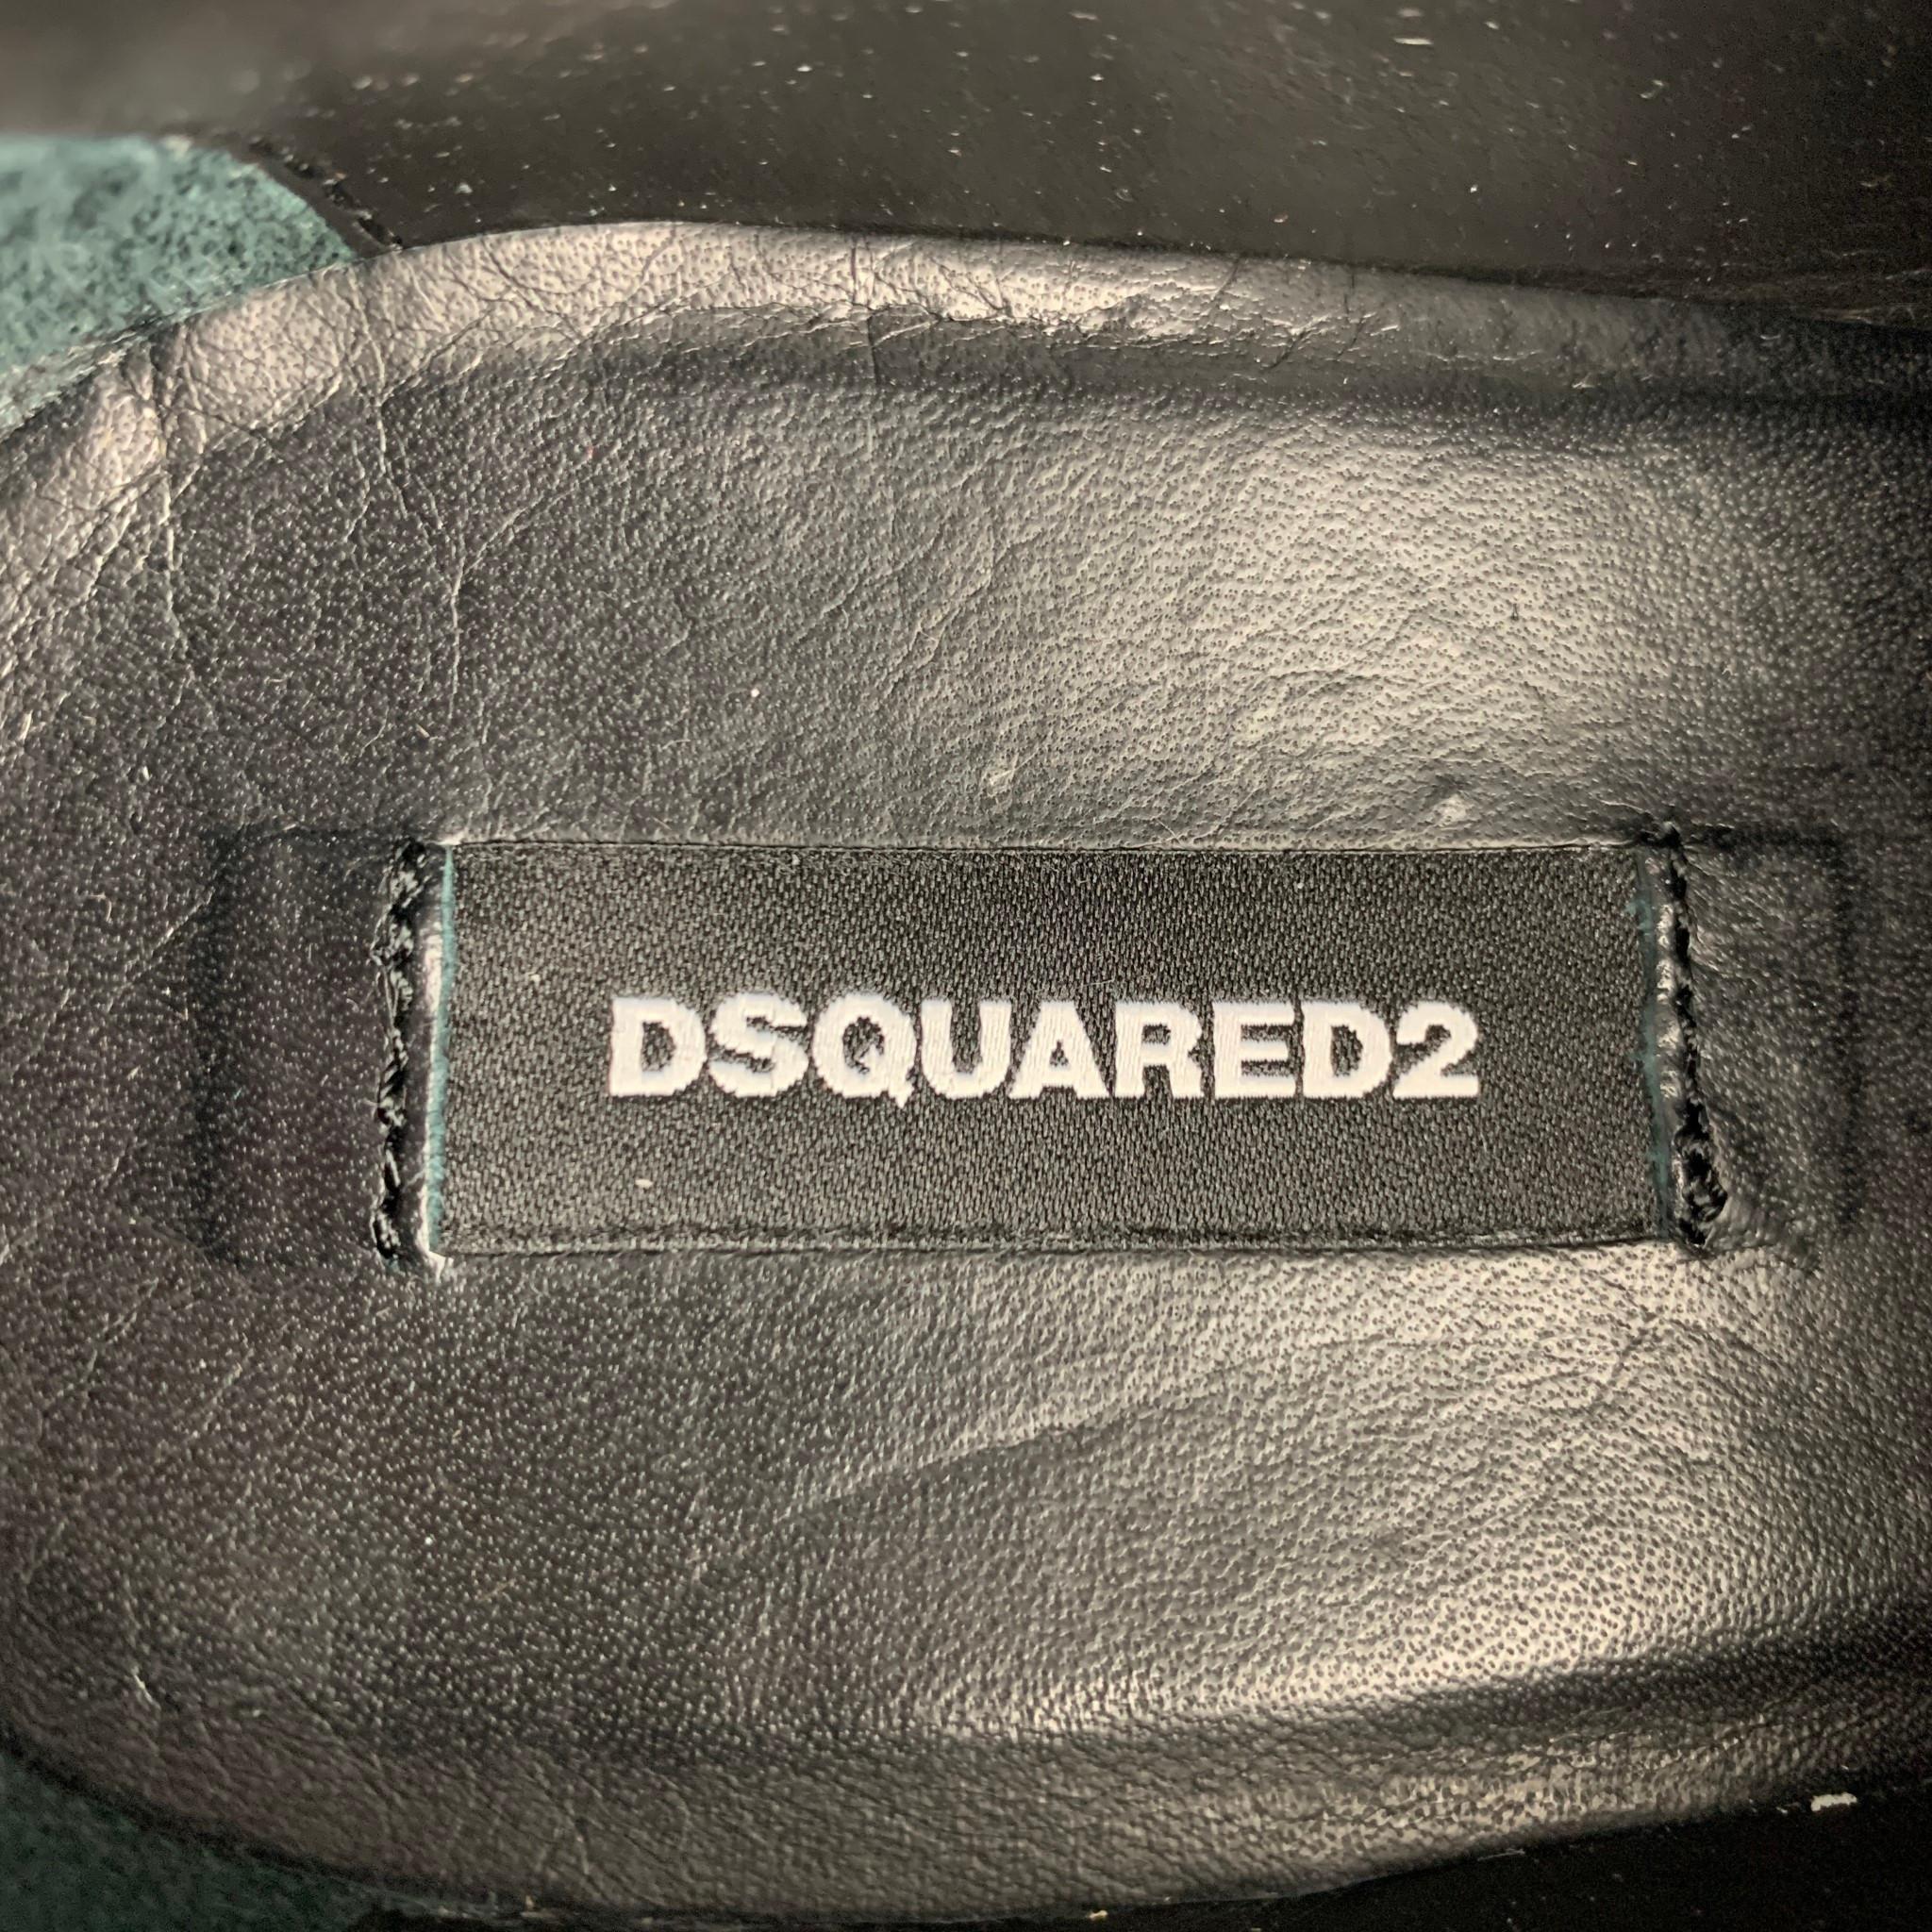 DSQUARED2 Worlds End Size 9 Black Leather Studded Lace Up Shoes 2